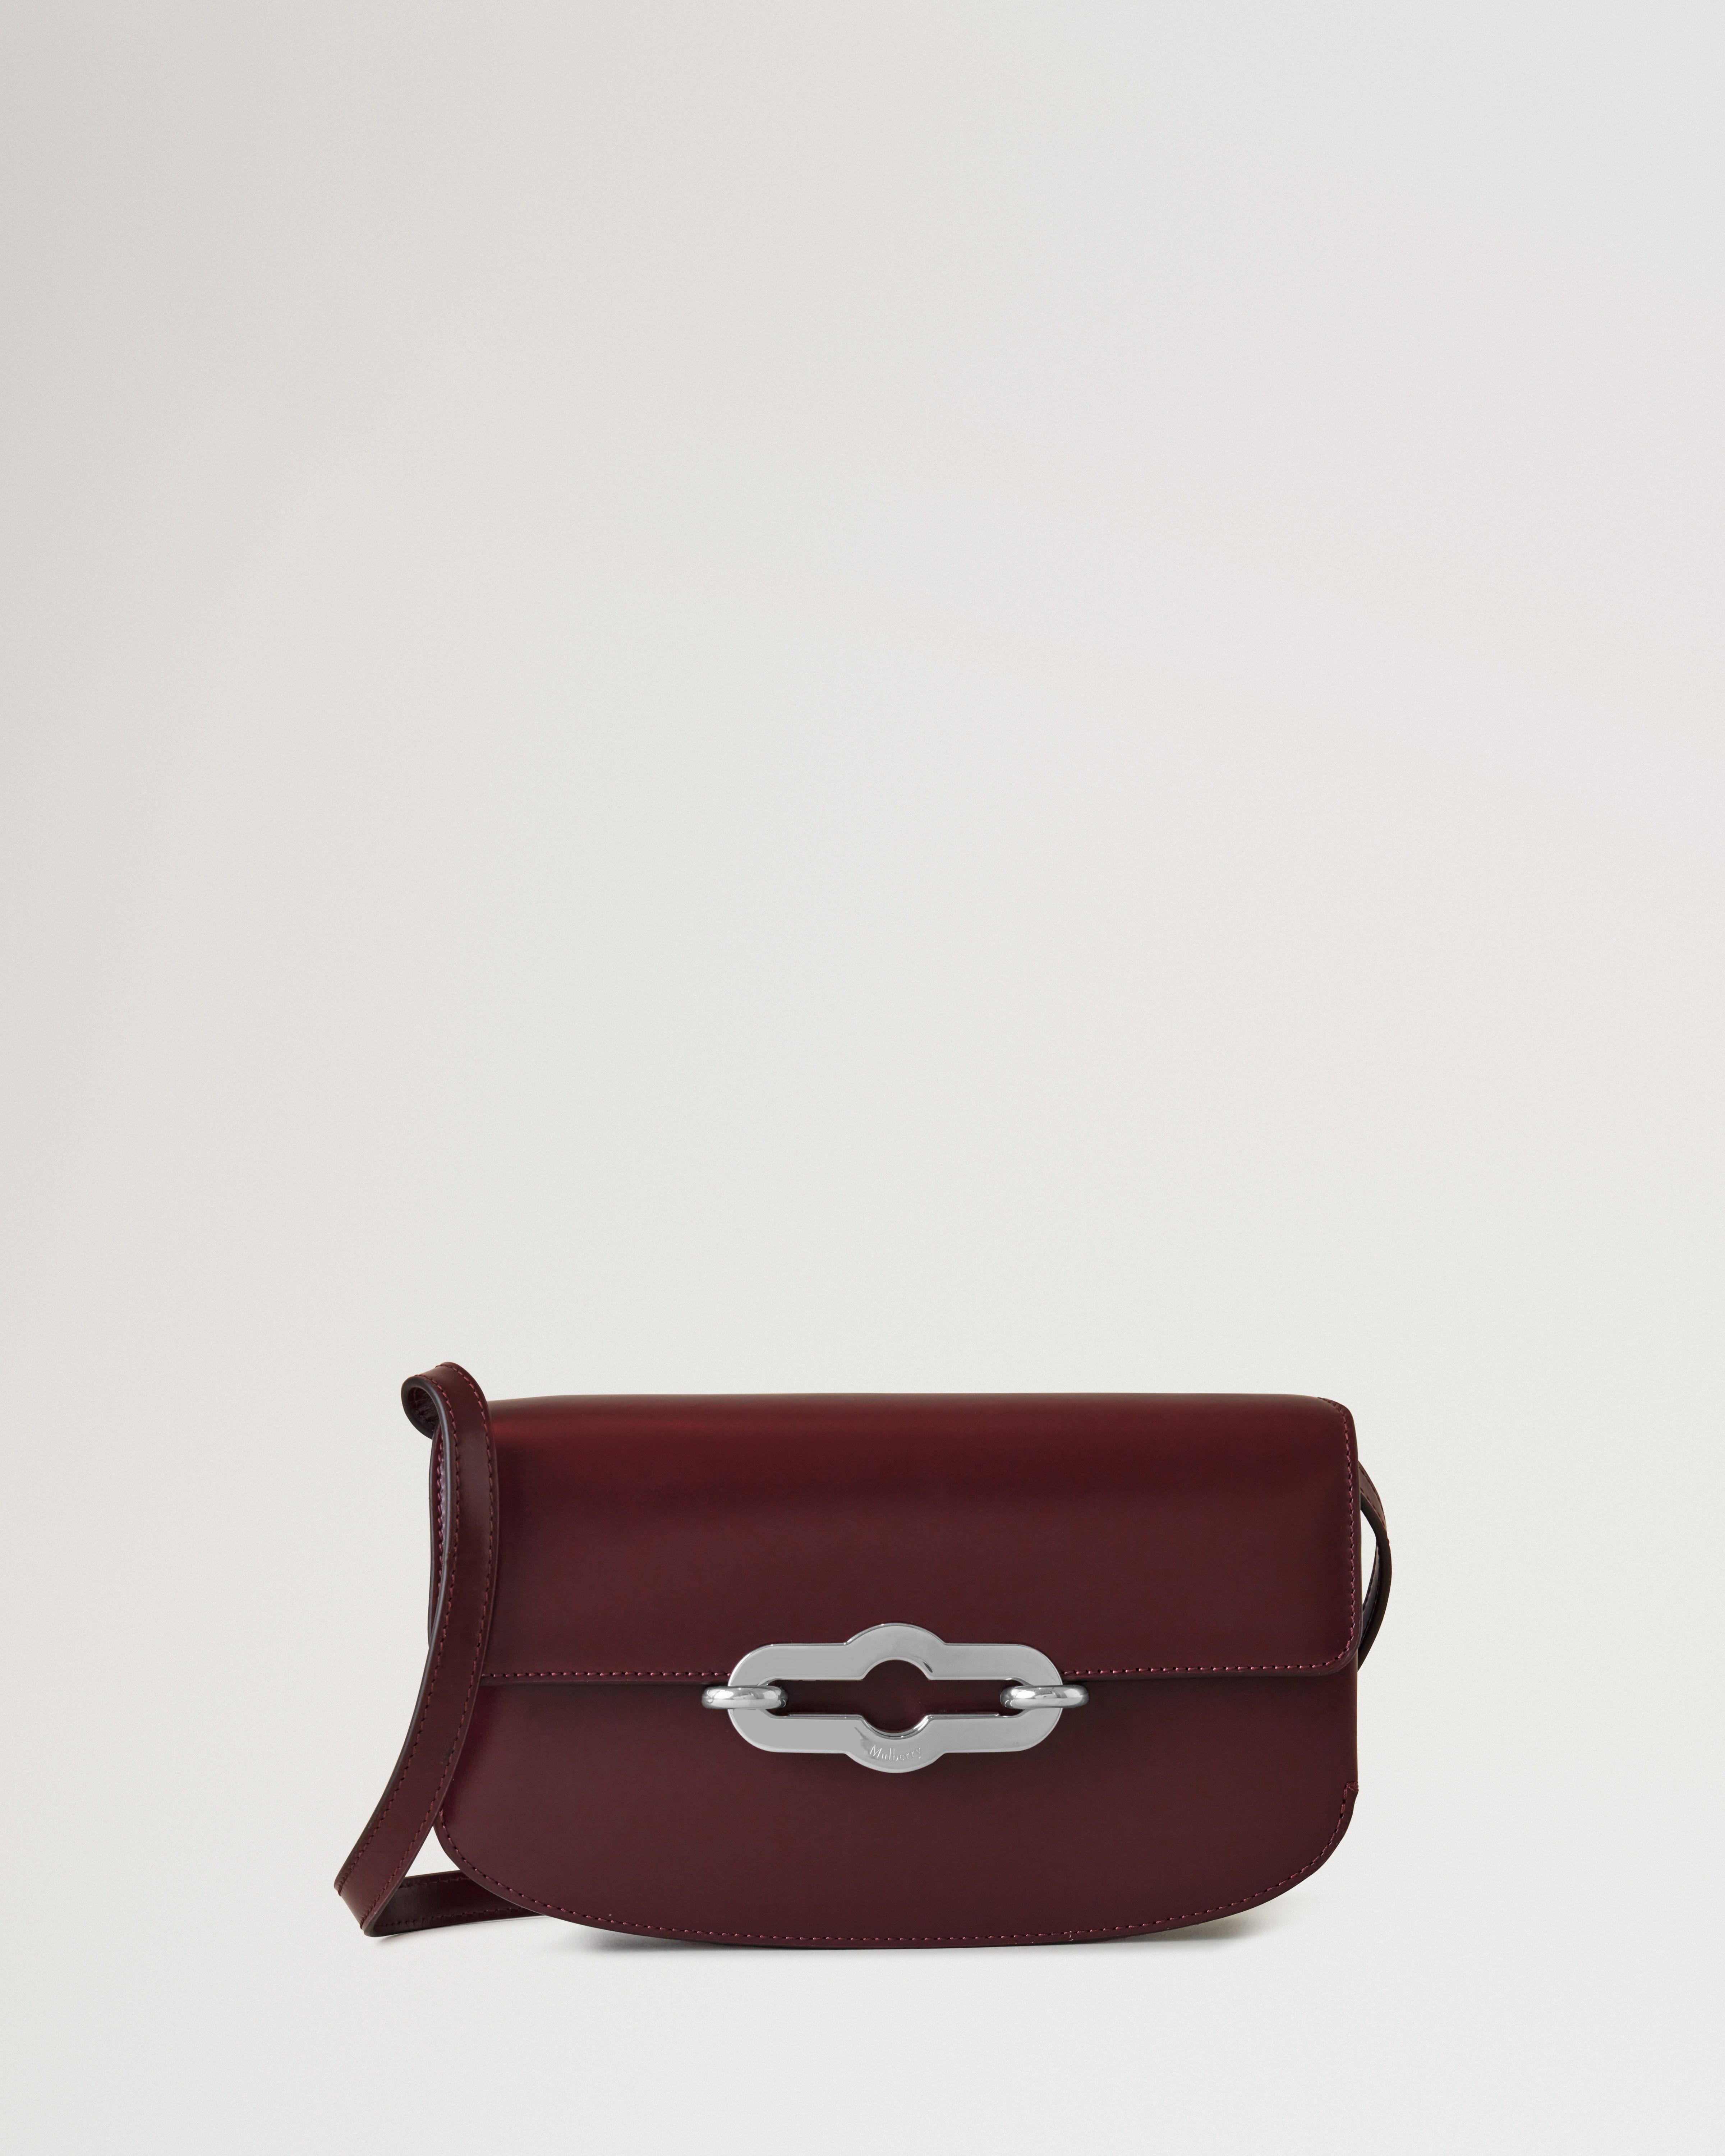 Mulberry East West Pimlico bag in Black Cherry